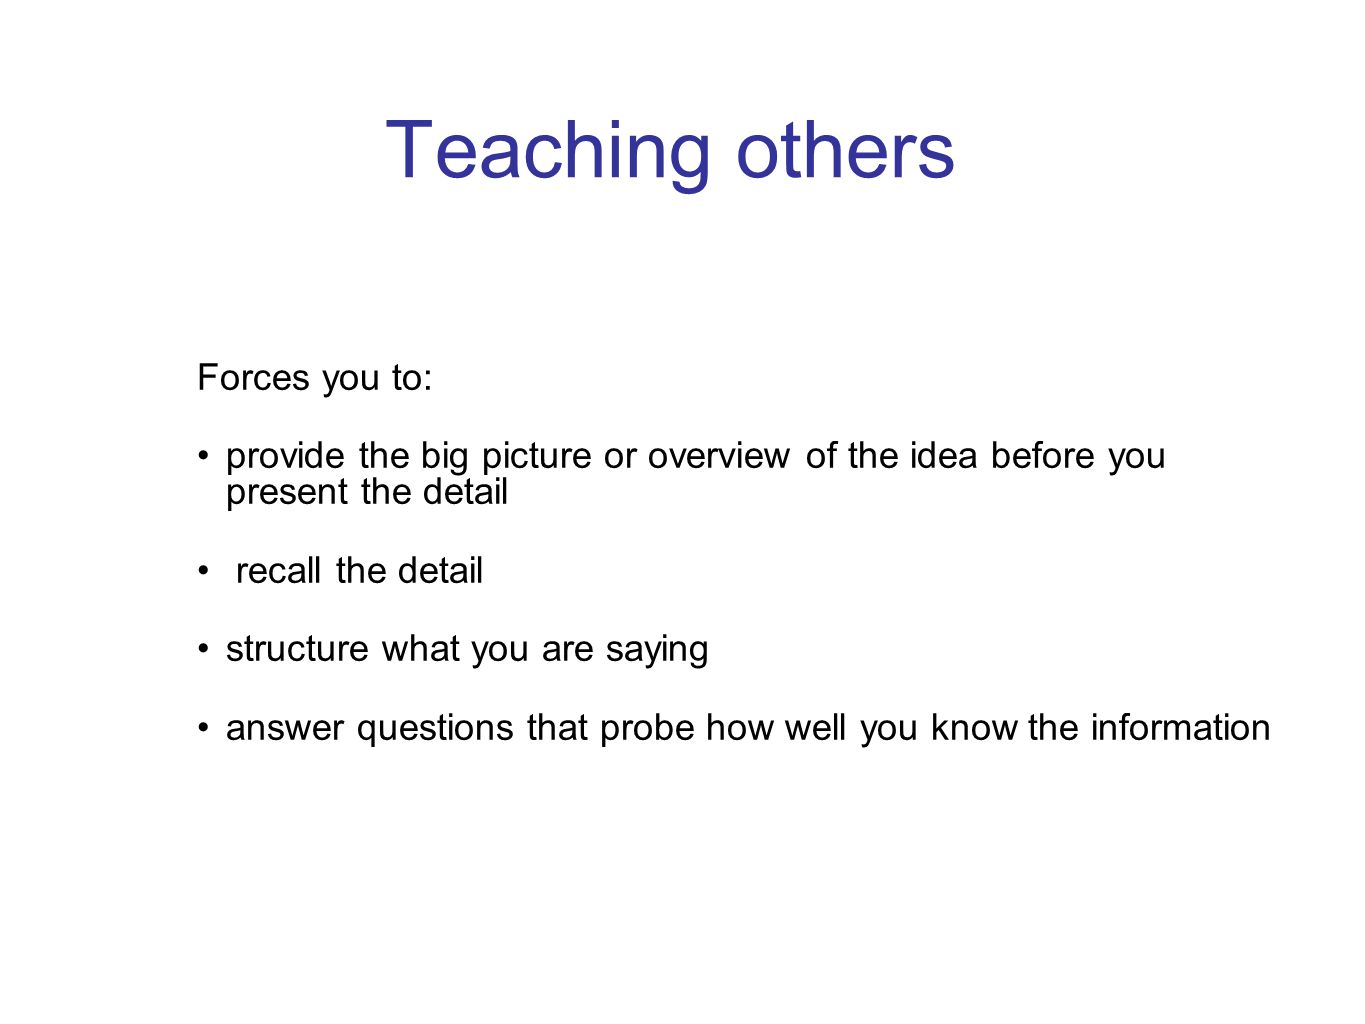 Teaching others Forces you to: provide the big picture or overview of the idea before you present the detail recall the detail structure what you are saying answer questions that probe how well you know the information